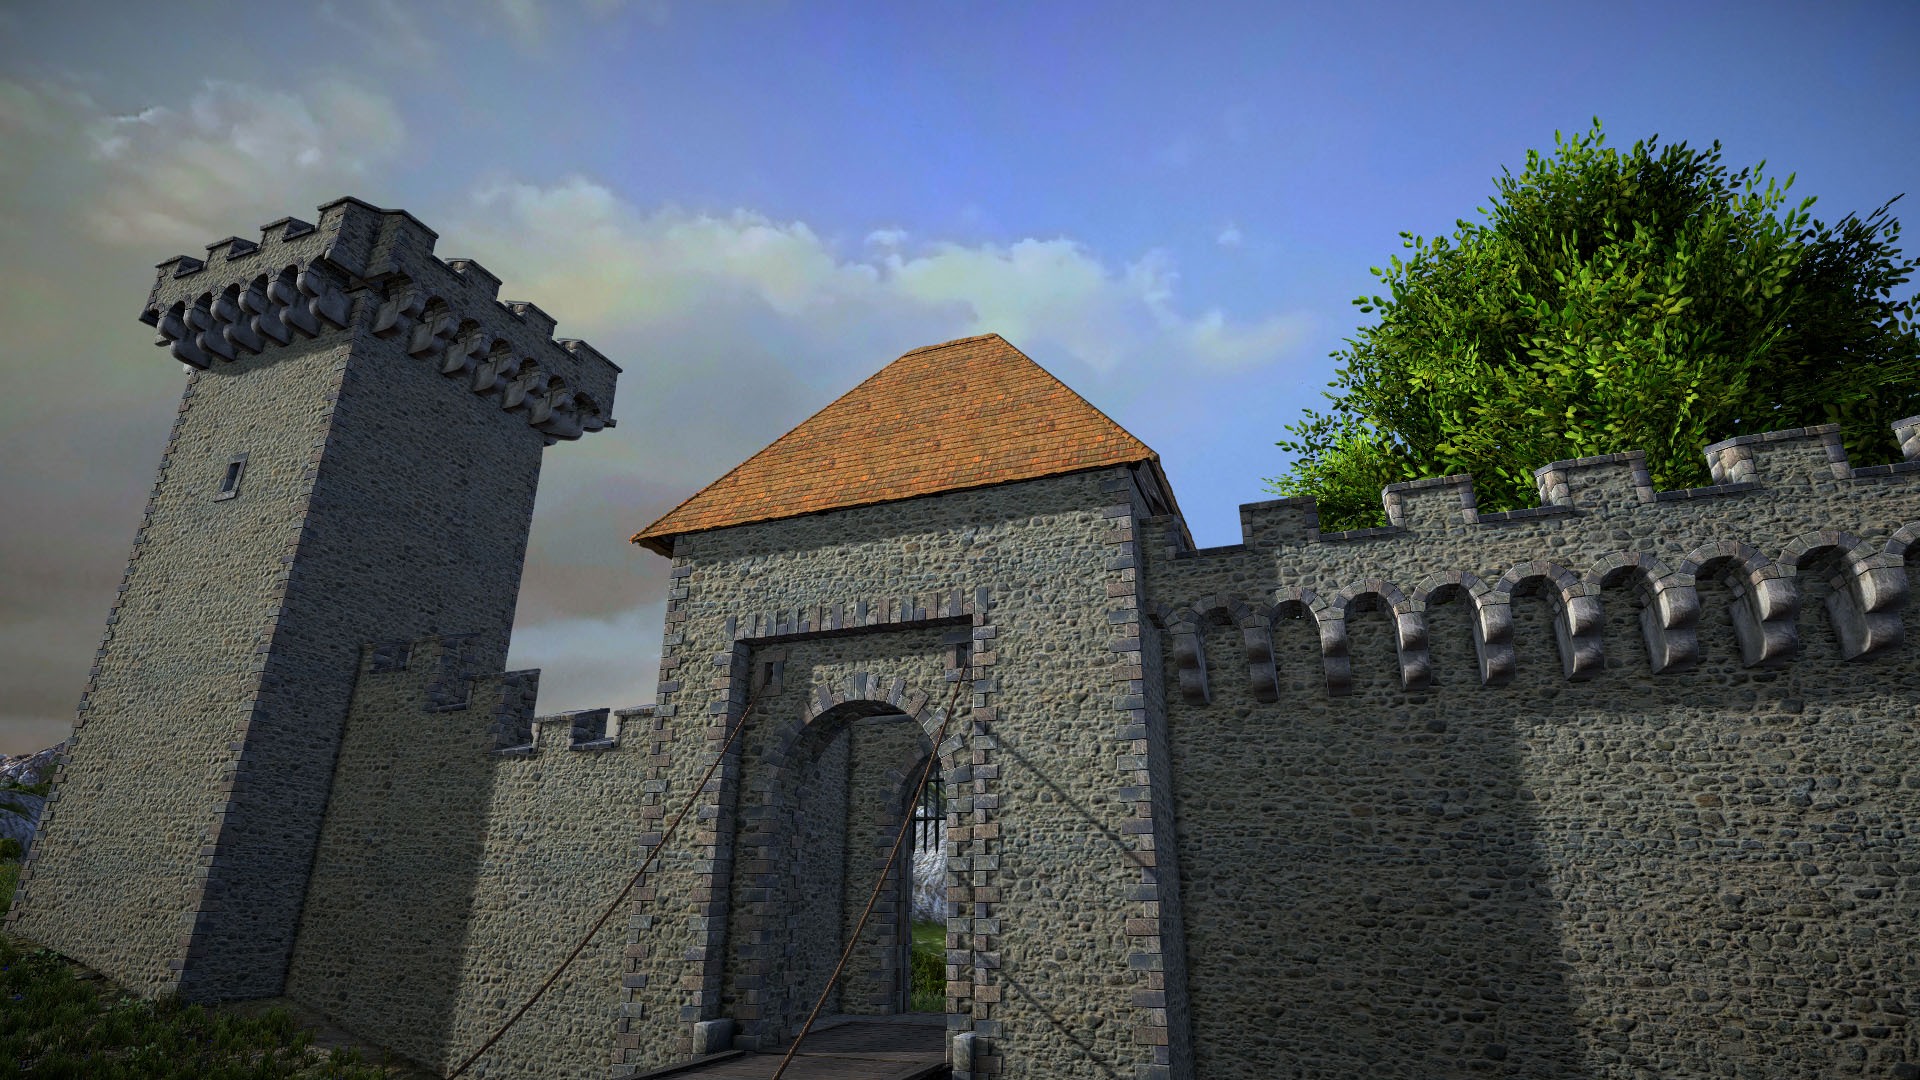 World of Castles se asoma... ¿Competencia para Bannerlord? ?interpolation=lanczos-none&output-format=jpeg&output-quality=95&fit=inside|637:358&composite-to%3D%2A%2C%2A%7C637%3A358&background-color=black